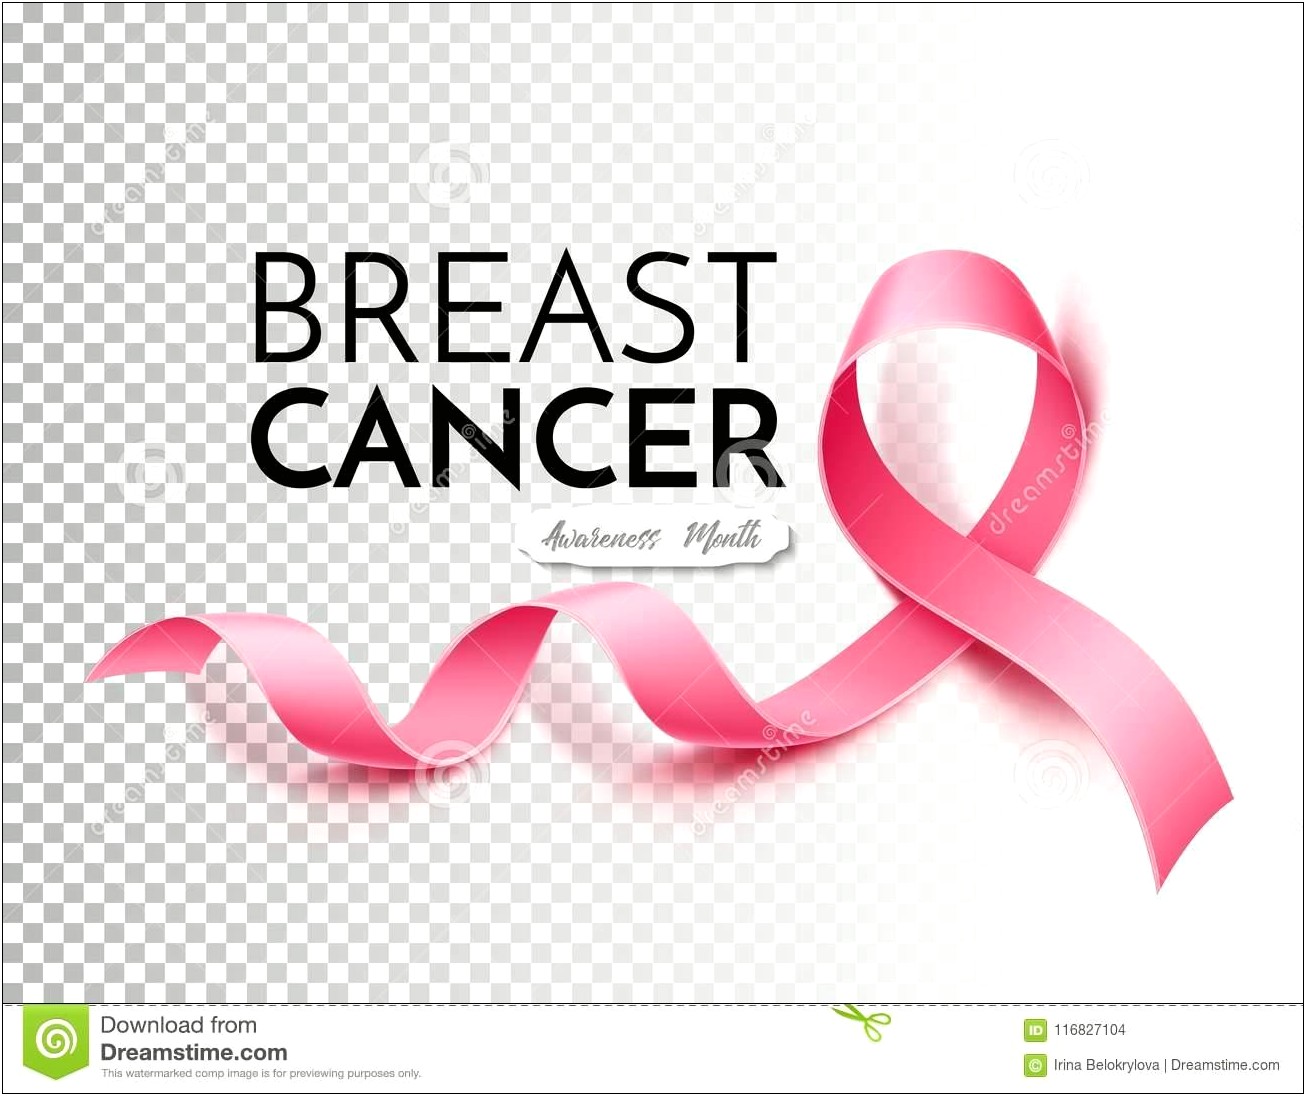 Breast Cancer Awareness Free Flyer Template